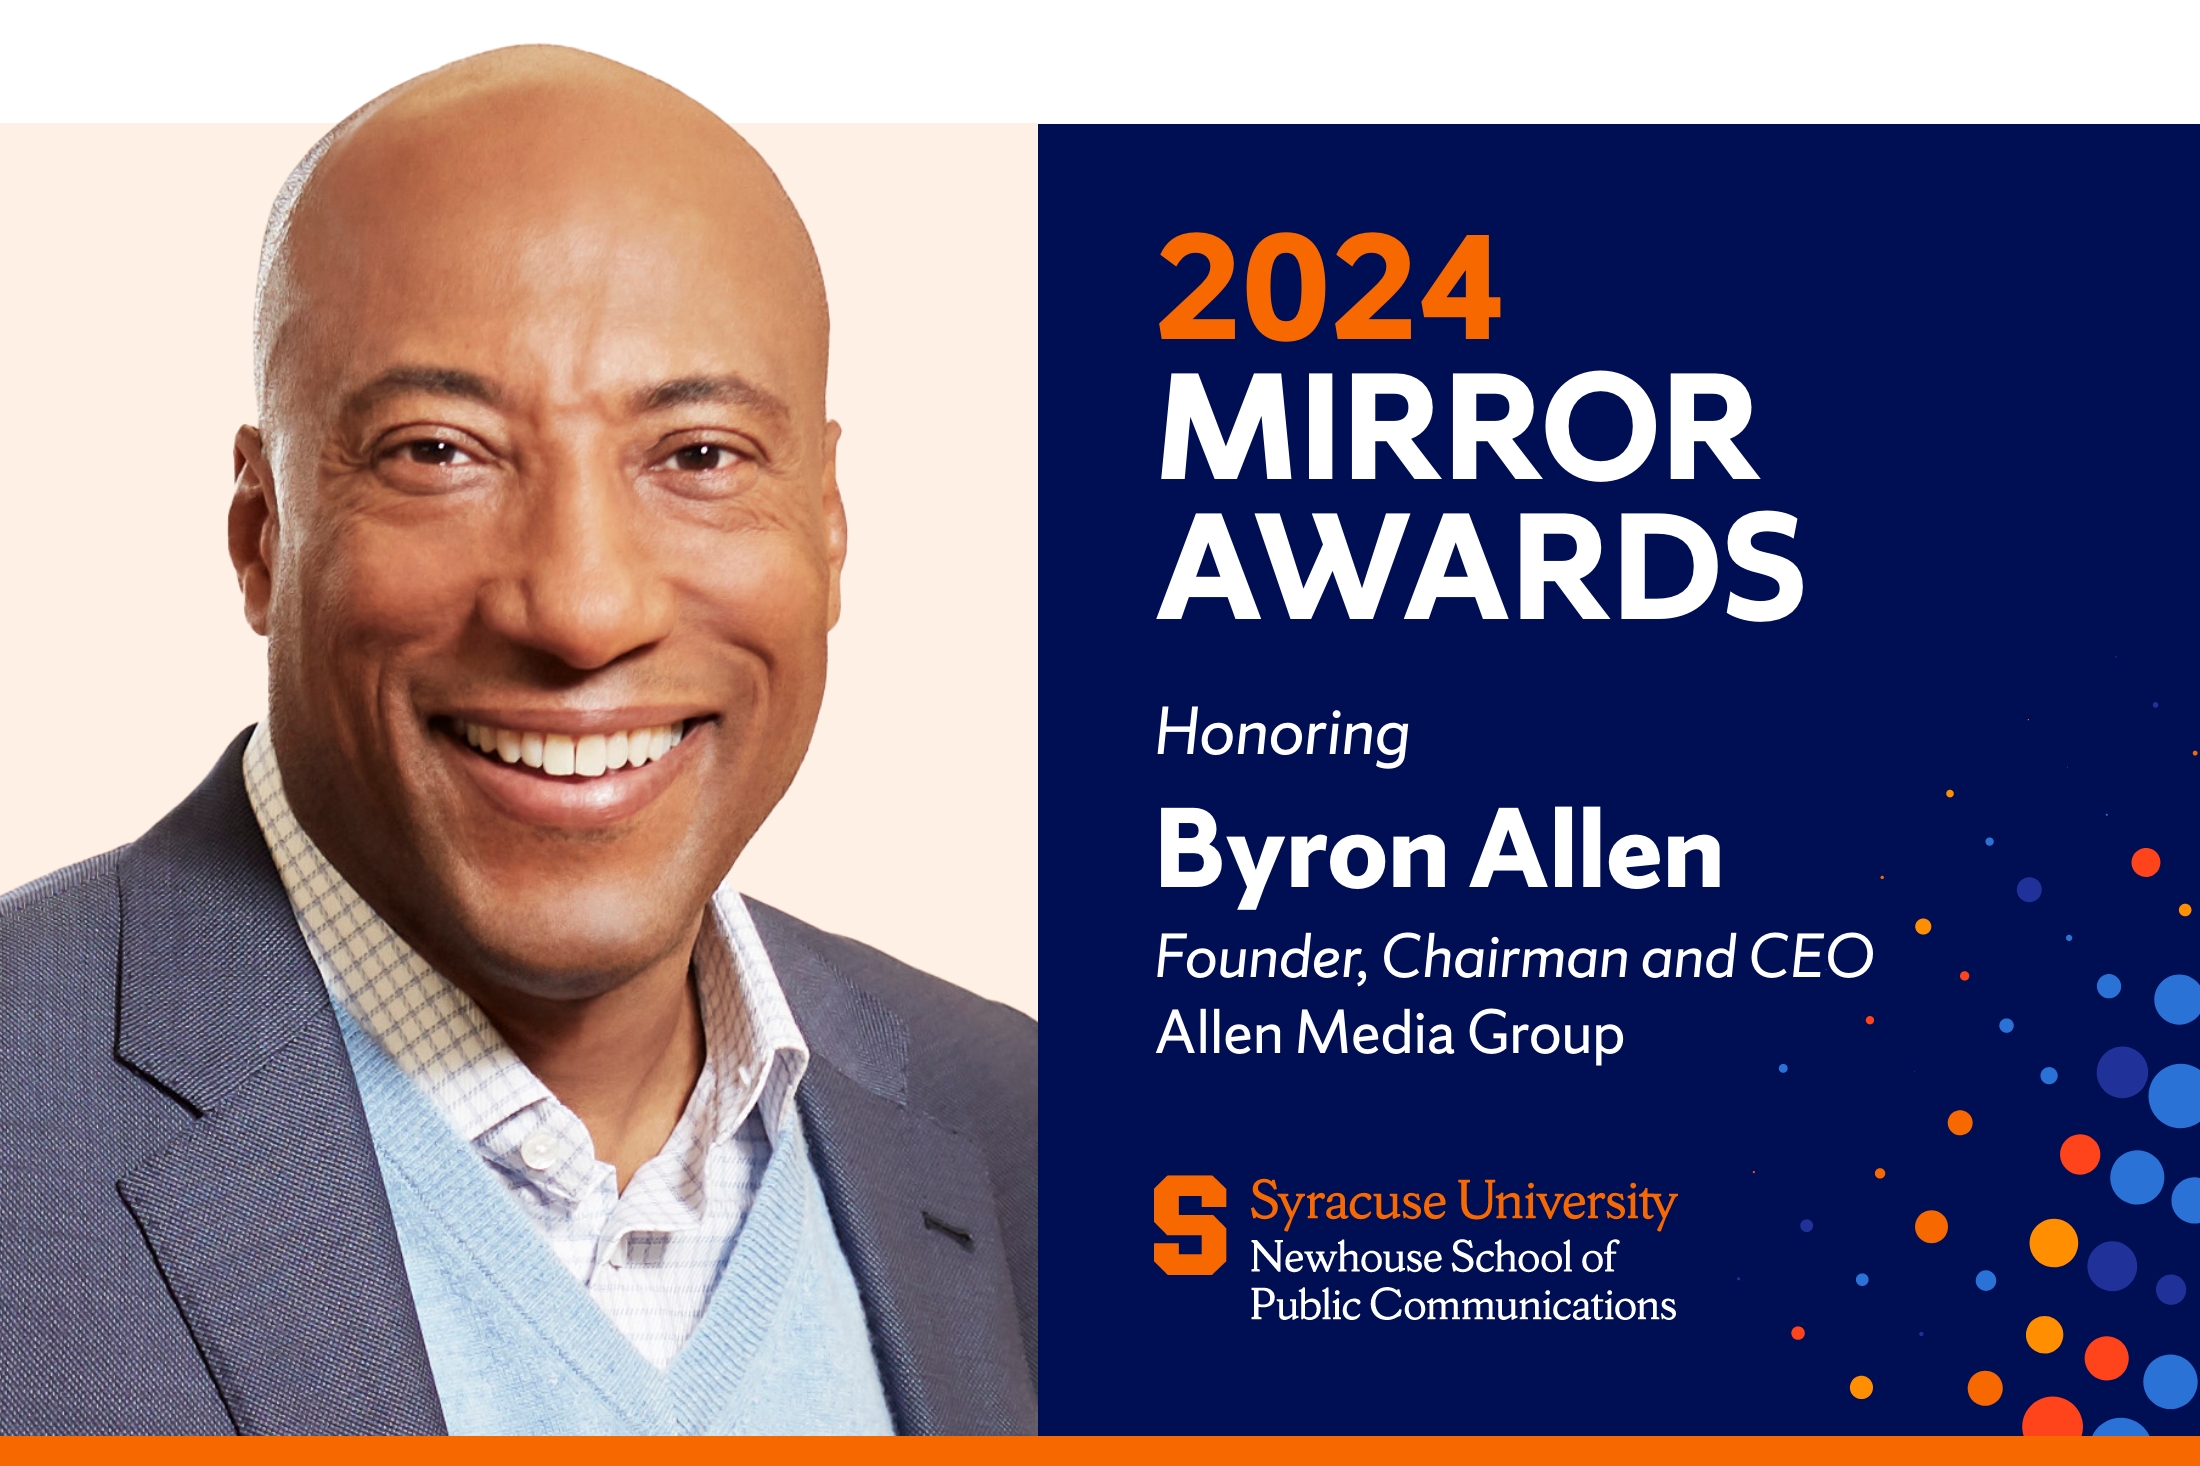 image with the headshot of a person on the left side and "2024 Mirror Awards Honoring Byron Allen Founder Chairman and CEO Allen Media Group" on the right side